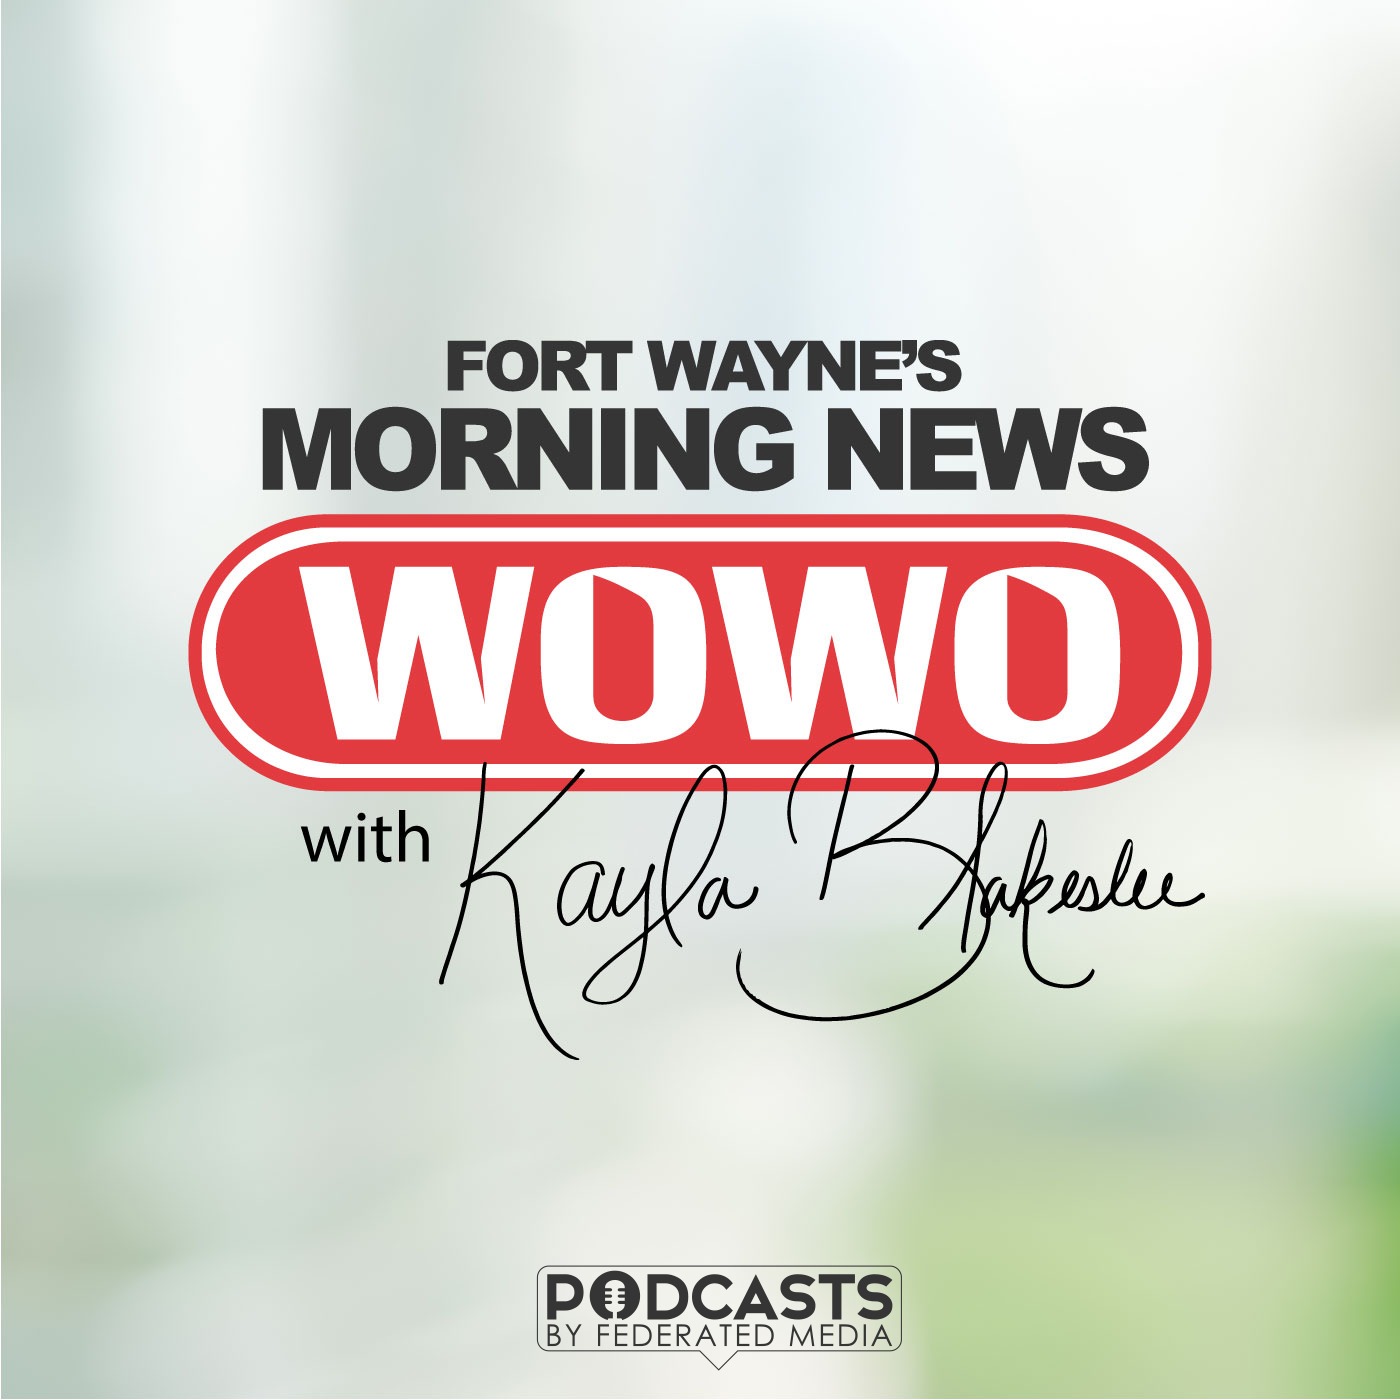 A Wonderful Gesture To WOWO's Penny Pitch Recipient